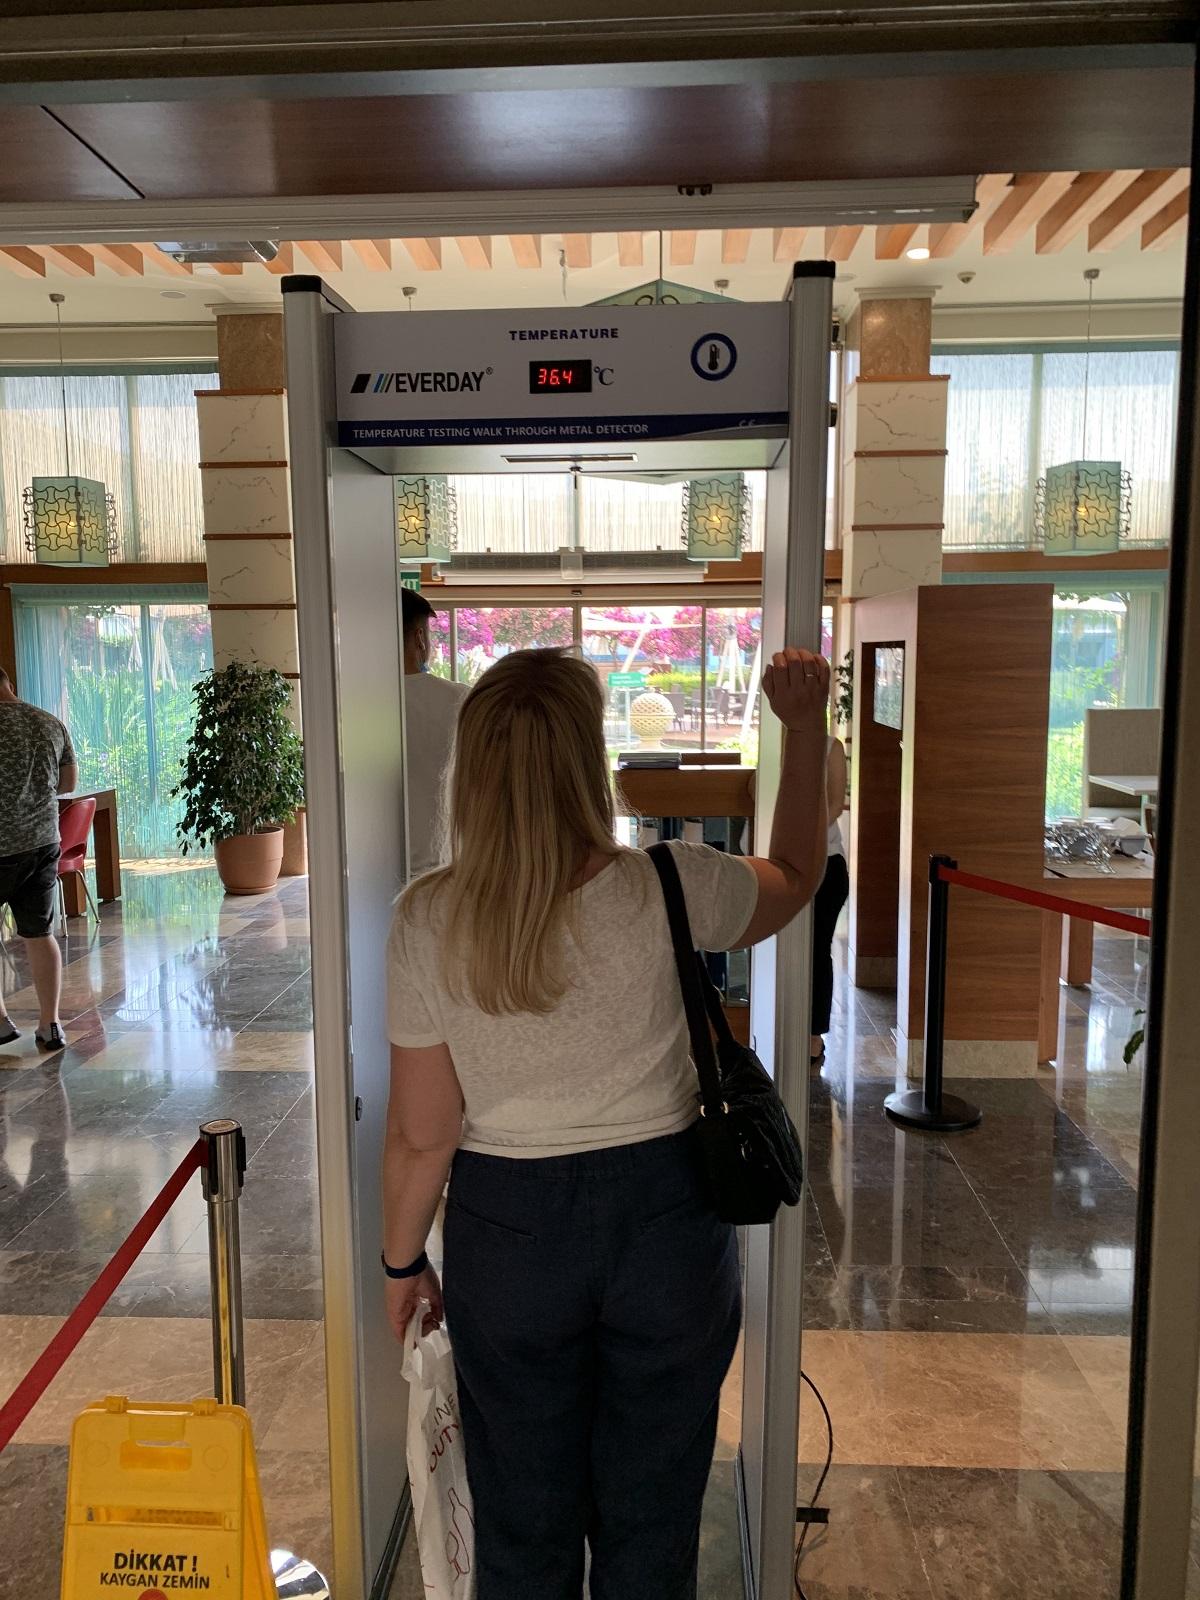 One cannot have breakfast before measuring body temperature. Security measures at the entrance to the restaurant at Hilton Dalaman Sarıgerme Resort & Spa